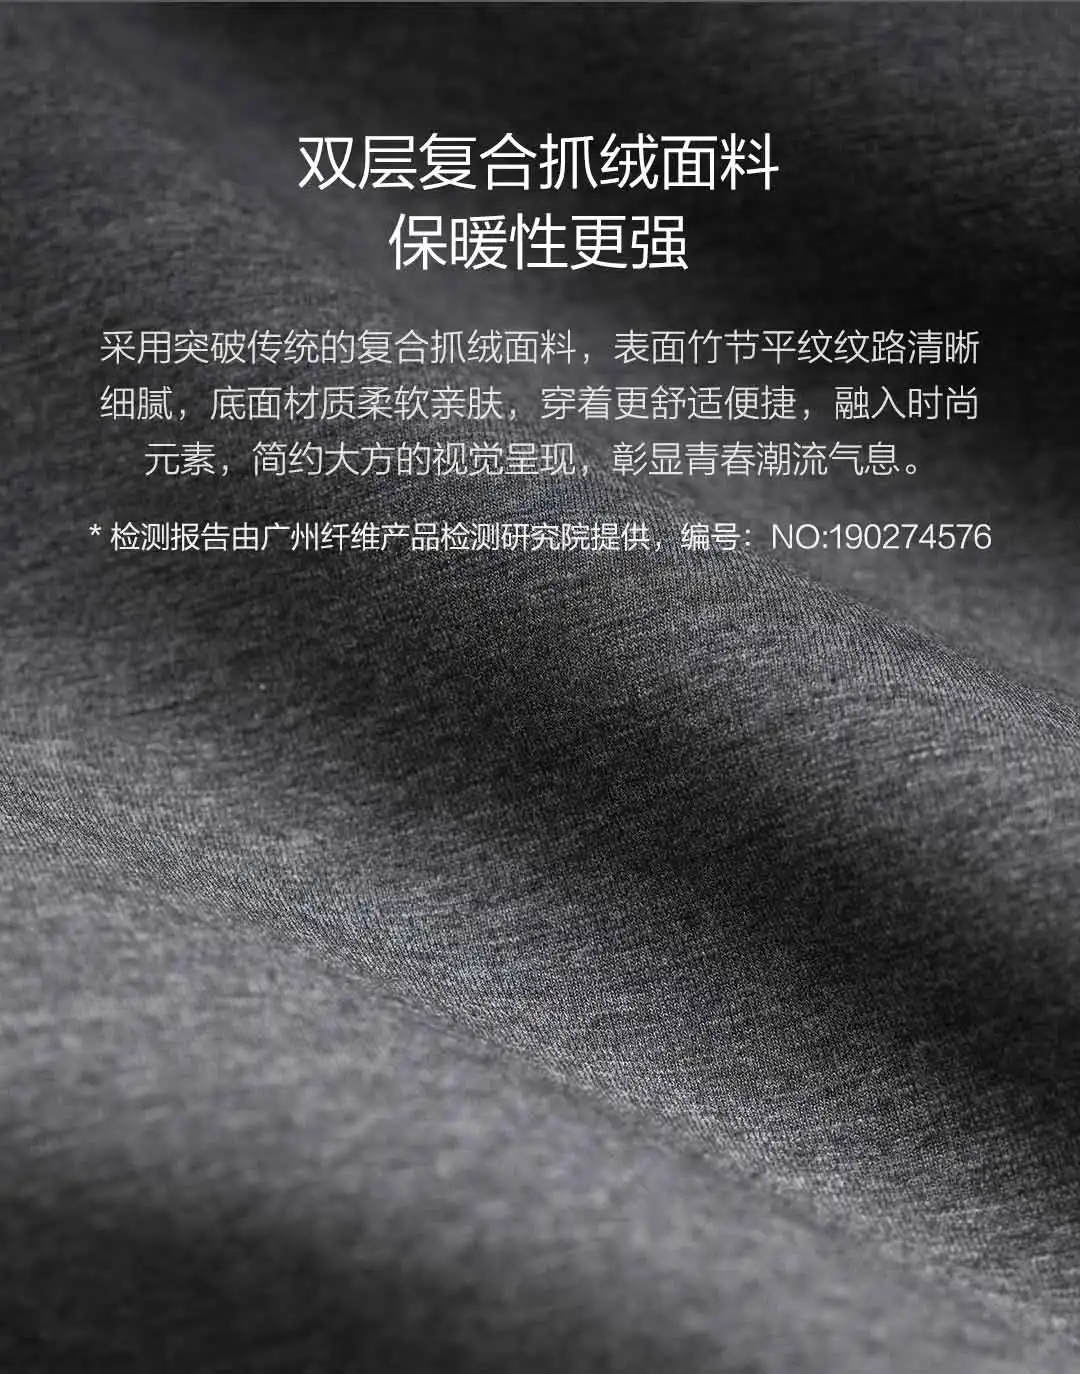 New Xiaomi MIjia Youpin 90 Points Men's plus velvet warm pants Double-layered fabric comfortable and warm fleece lining